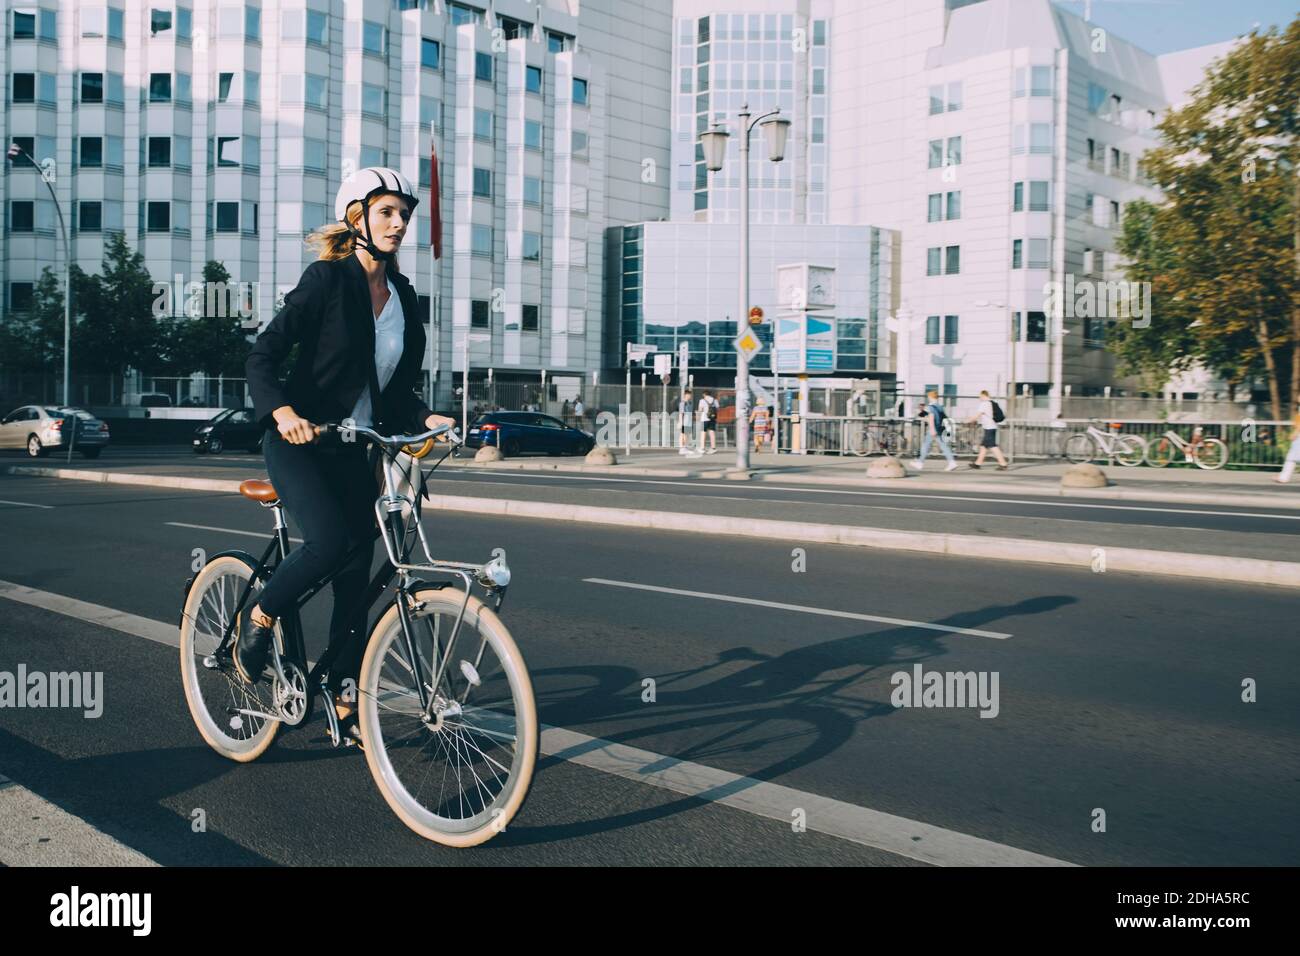 Full length of young woman wearing helmet riding bicycle on street in city Stock Photo